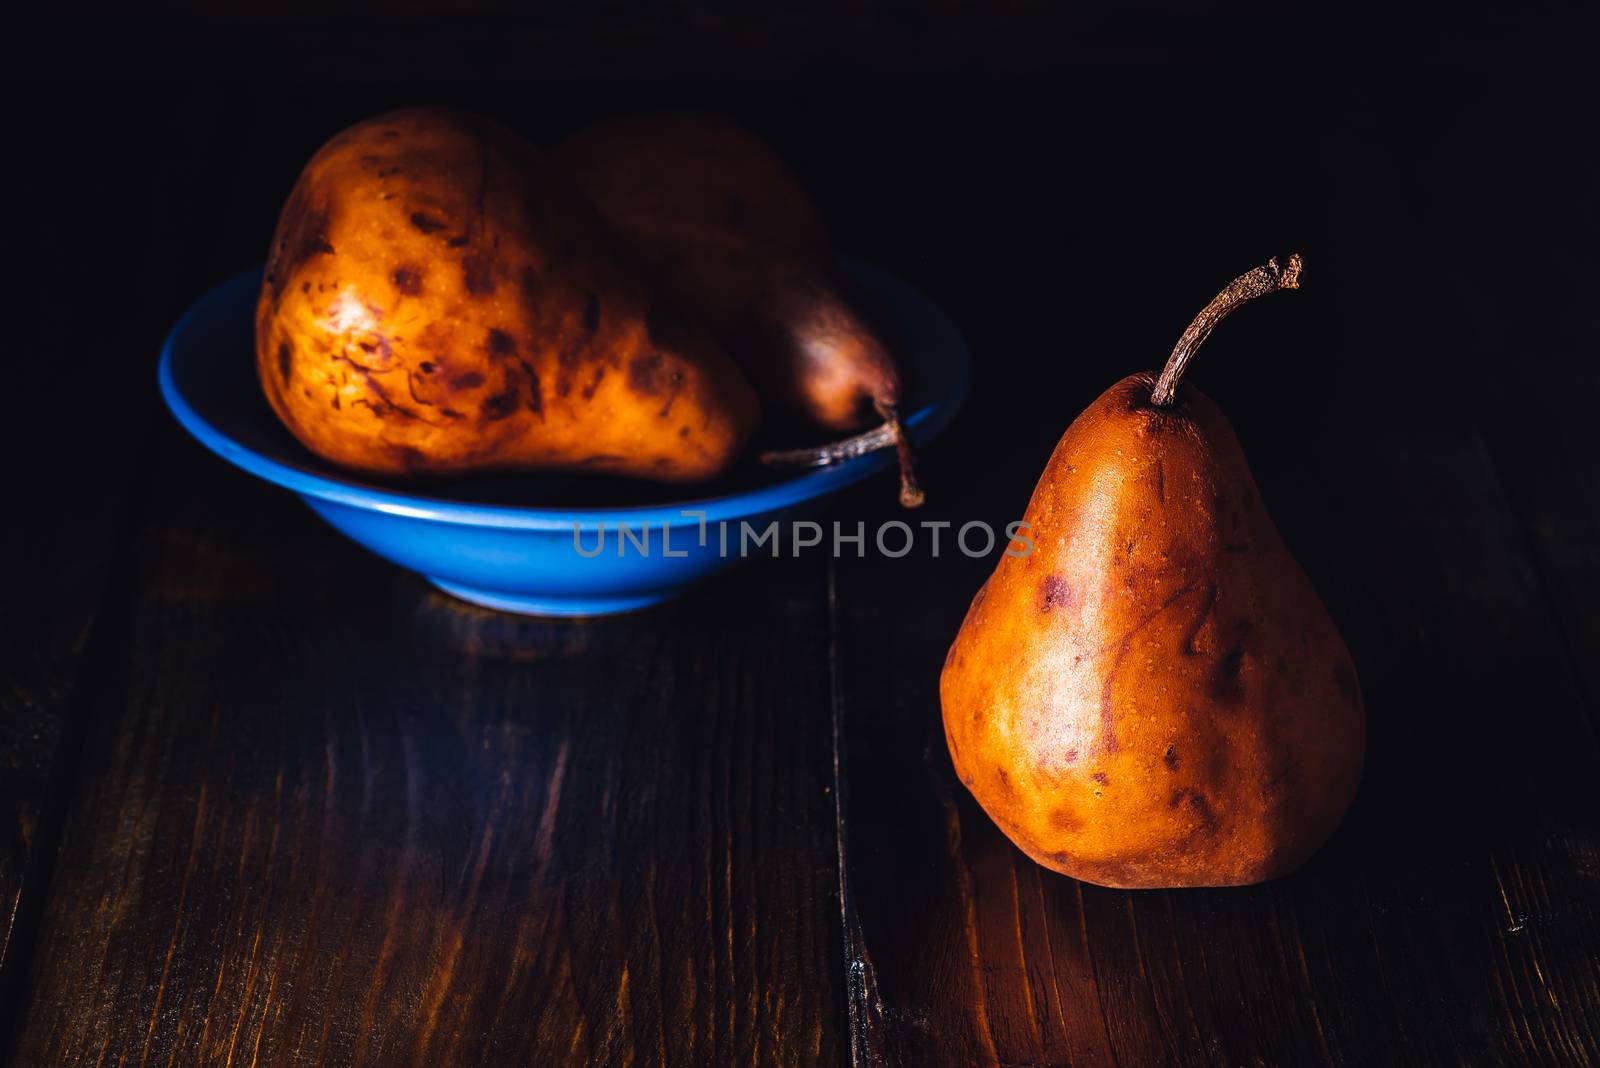 Golden Pears in Blue Bowl and One Pear Near.